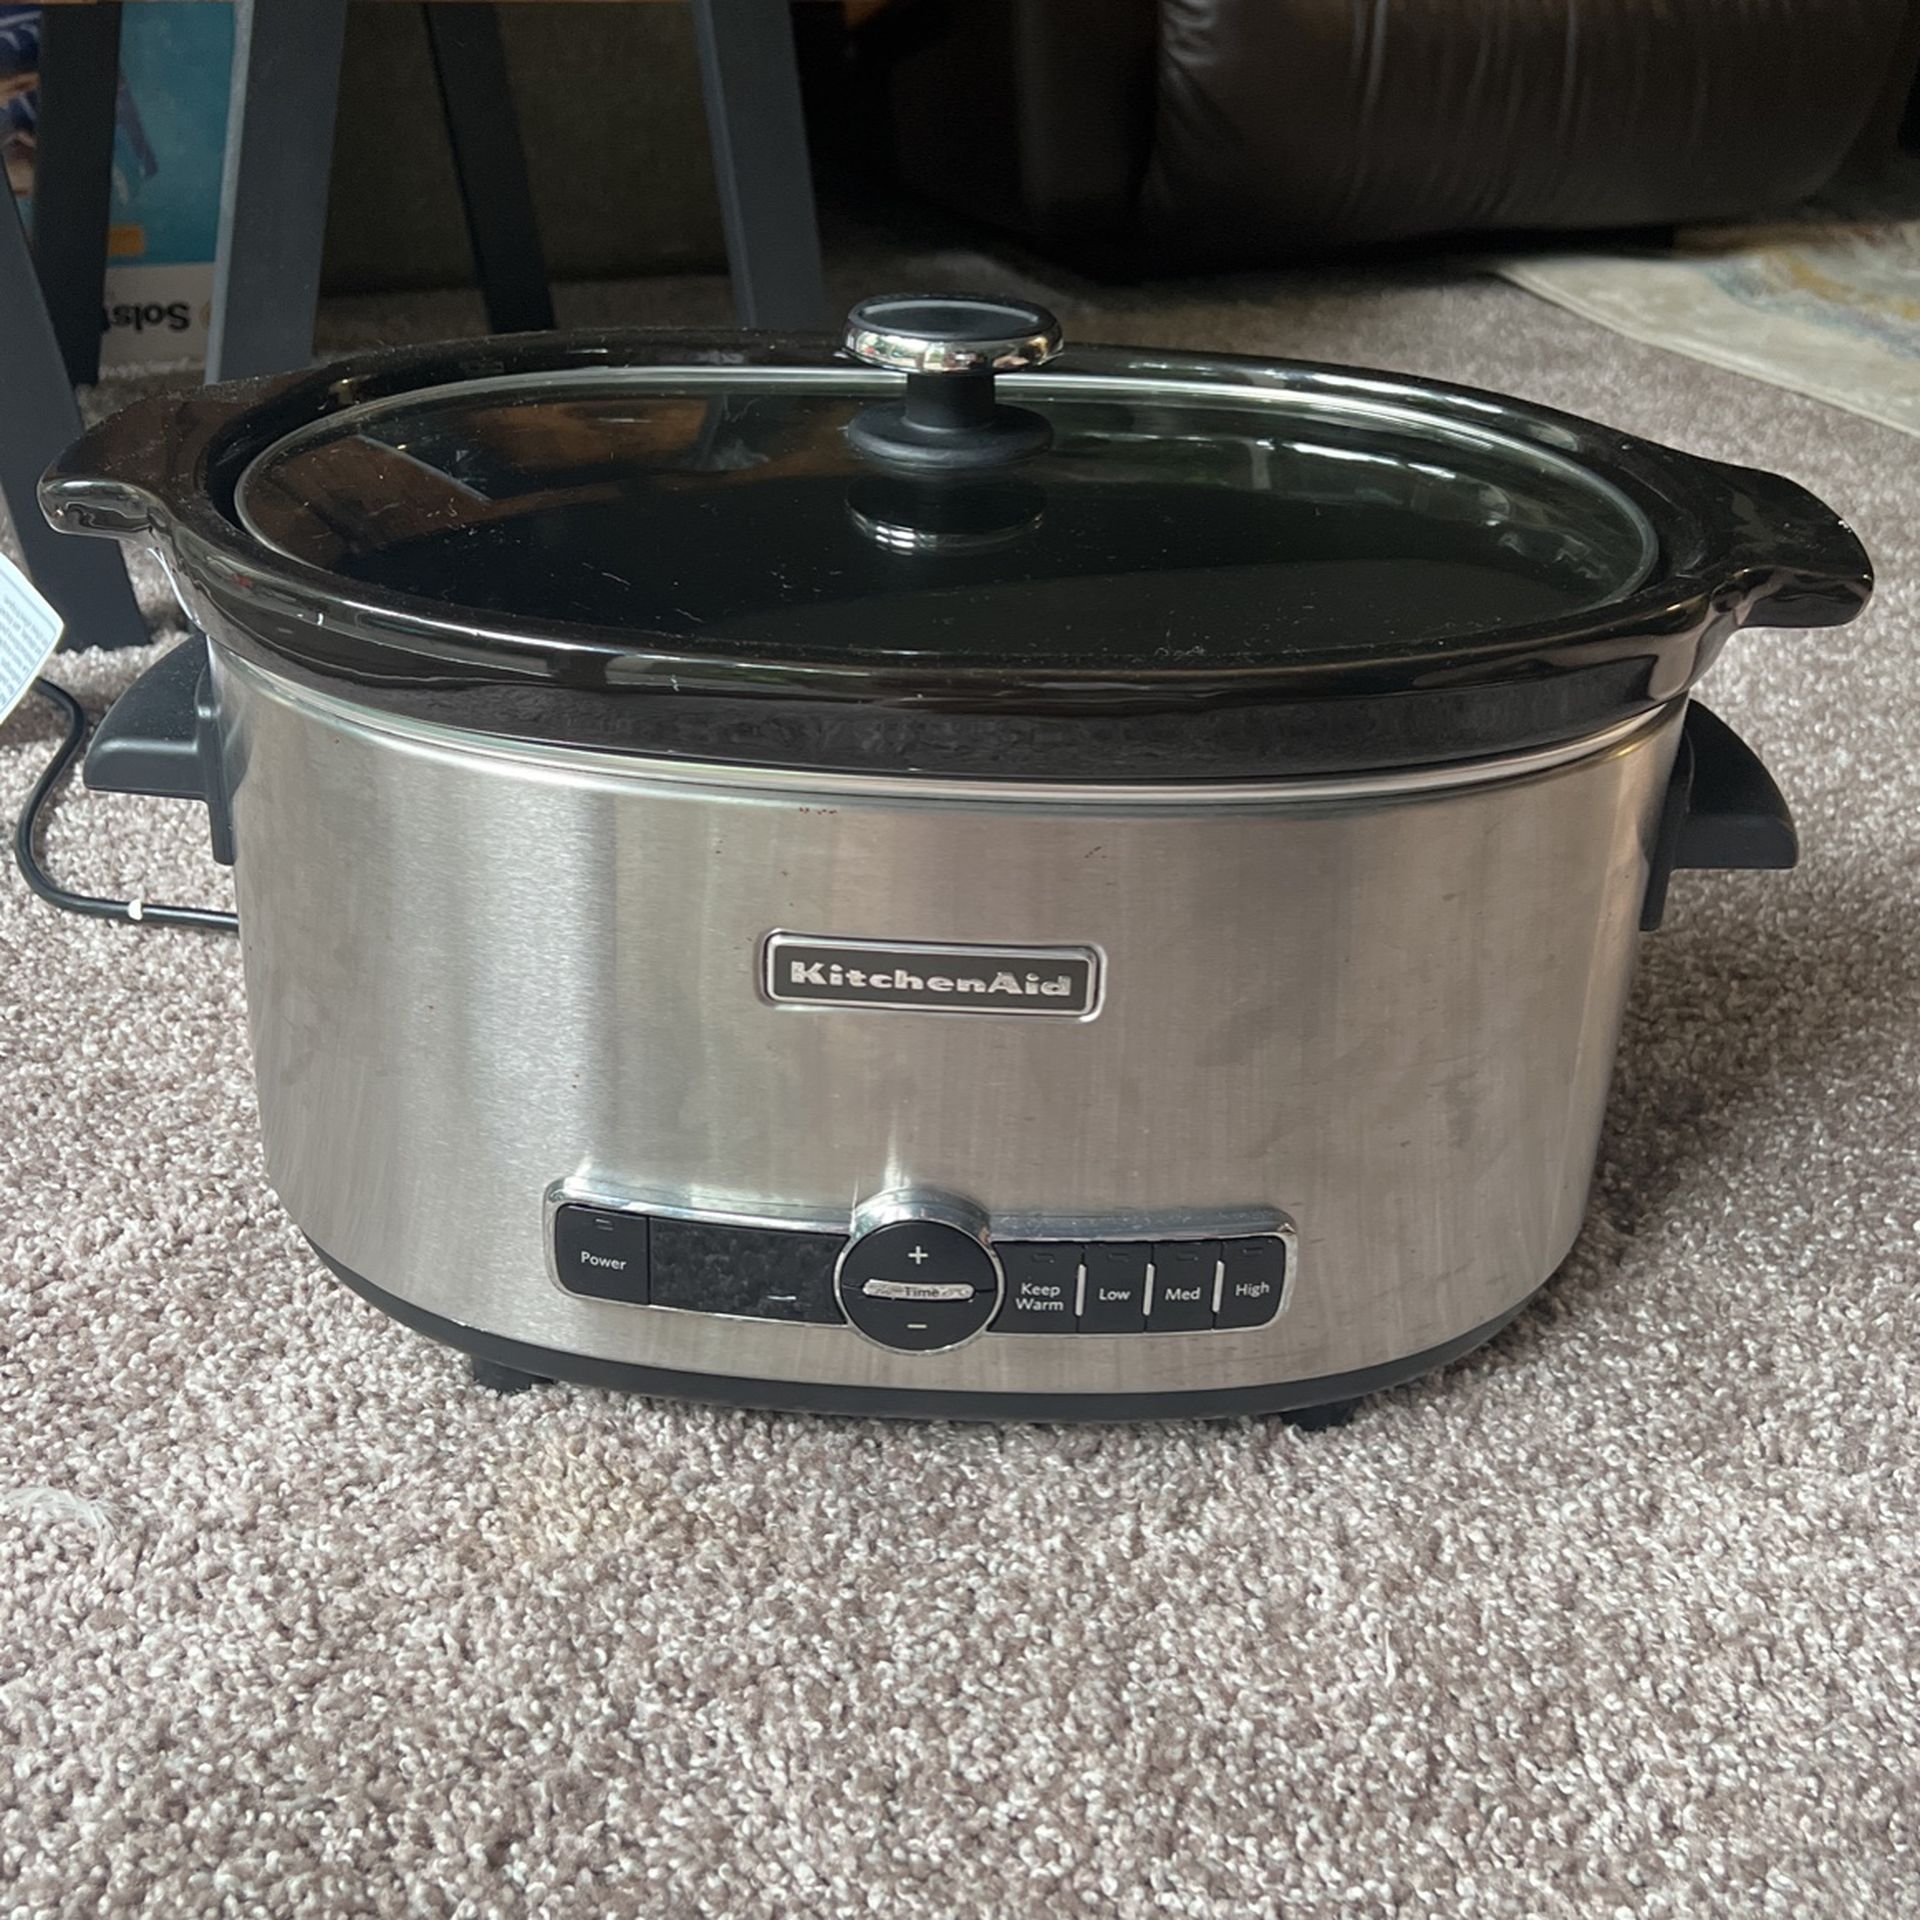 peber Antage afsnit Kitchen Aid 6 Quart Slow Cooker for Sale in Seattle, WA - OfferUp